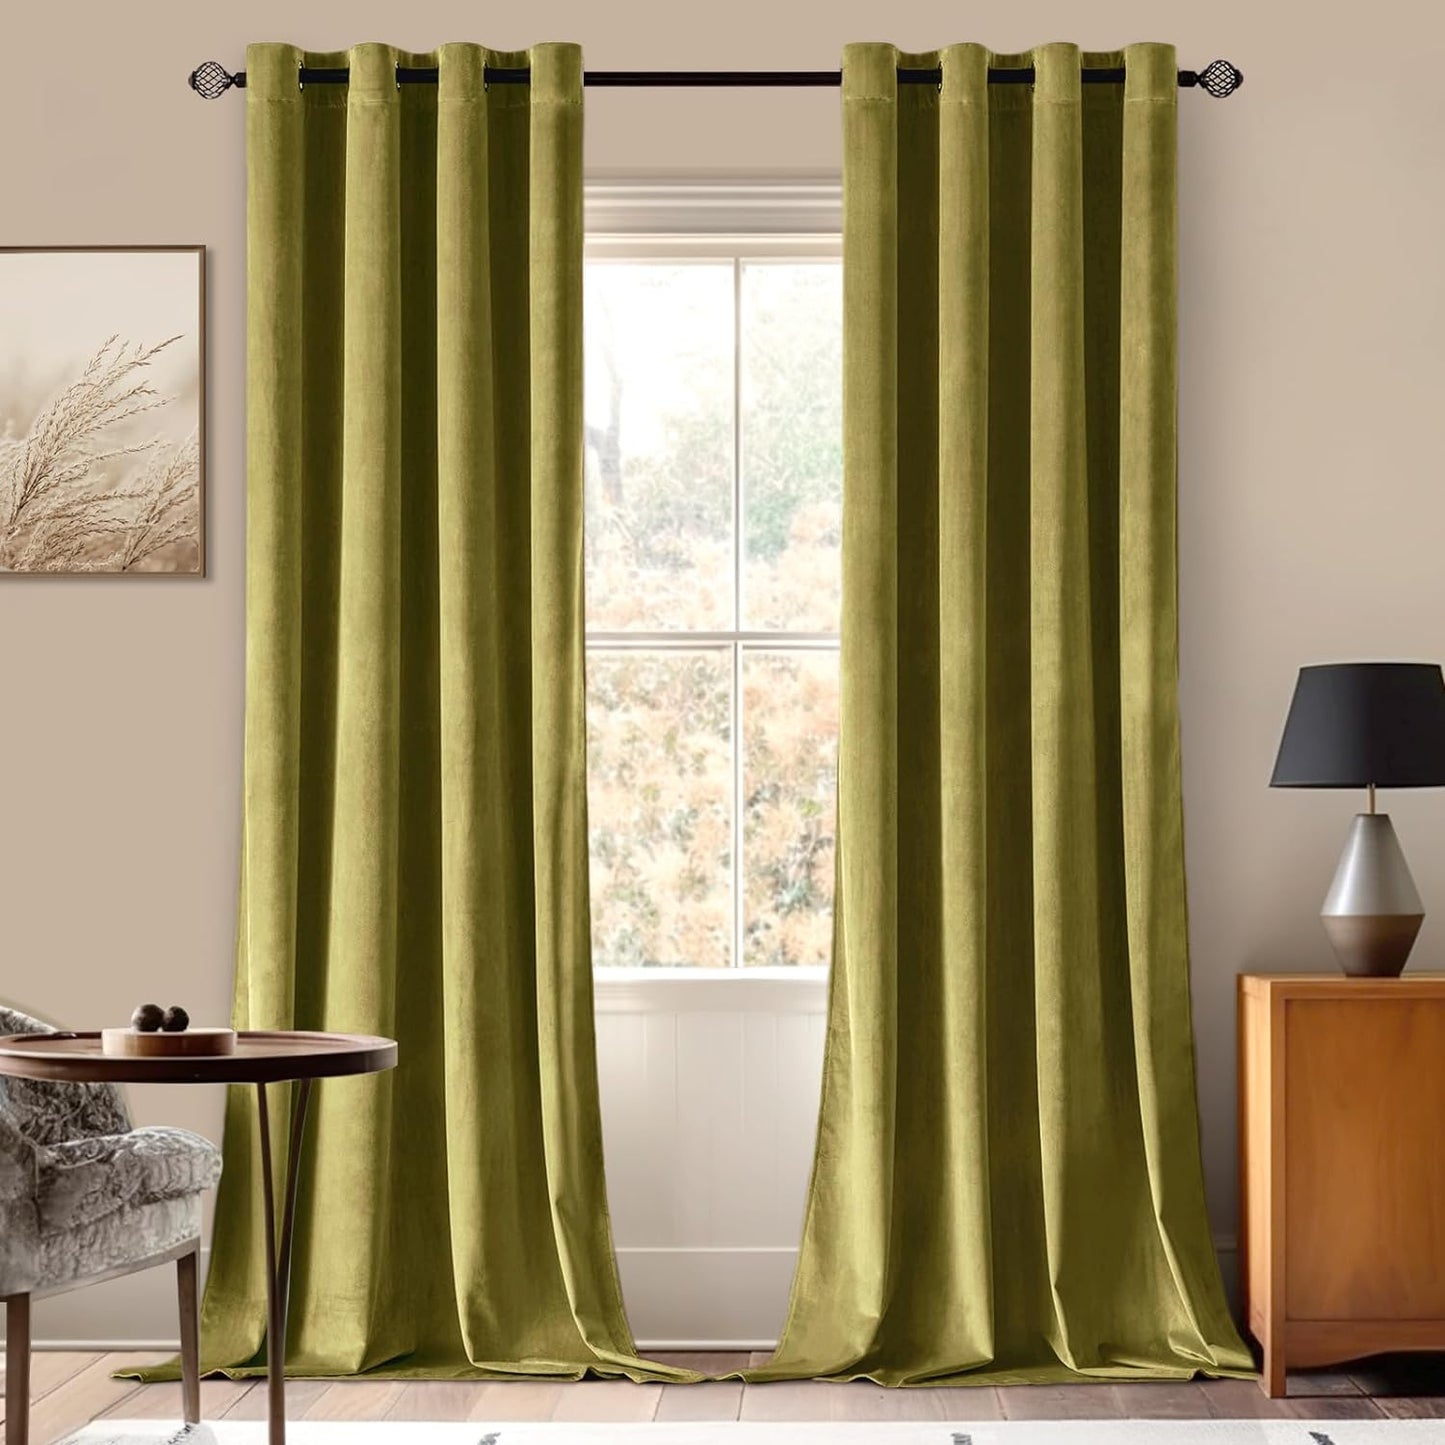 MIULEE Velvet Curtains Olive Green Elegant Grommet Curtains Thermal Insulated Soundproof Room Darkening Curtains/Drapes for Classical Living Room Bedroom Decor 52 X 84 Inch Set of 2  MIULEE Moss Green W52 X L96 